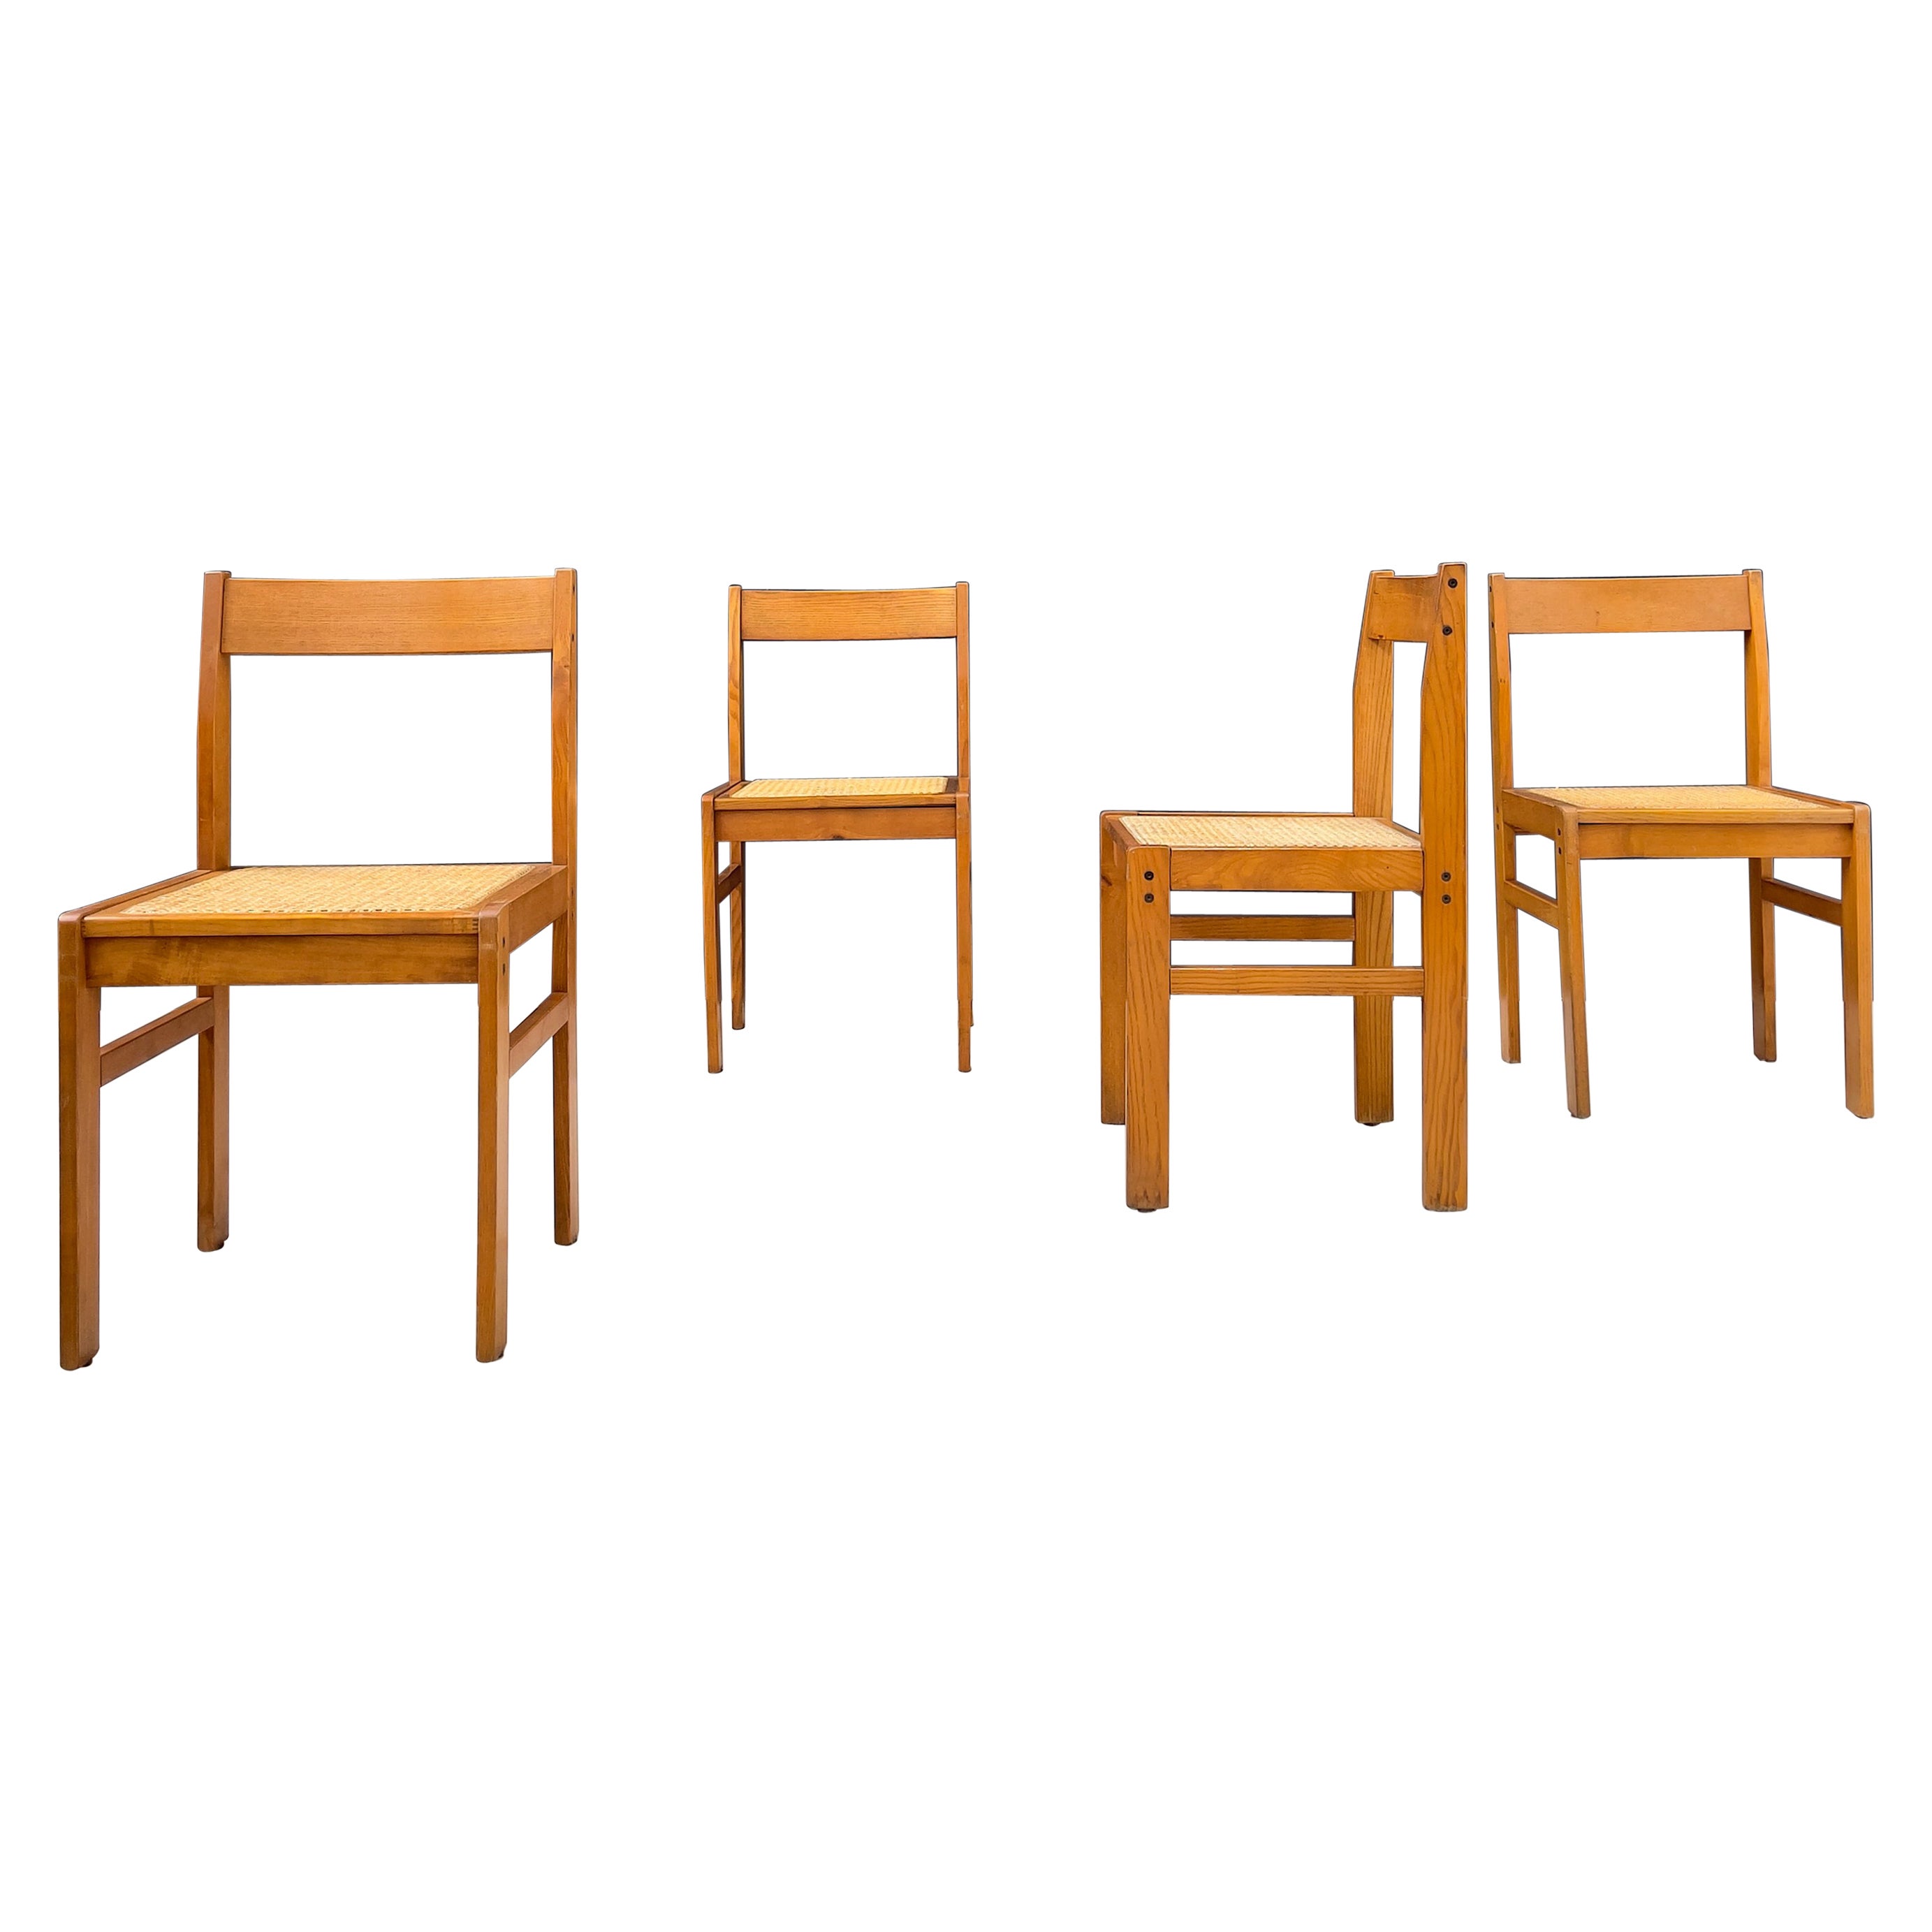 Set of 4 Vintage Chairs in Ash and Caning 1950 For Sale